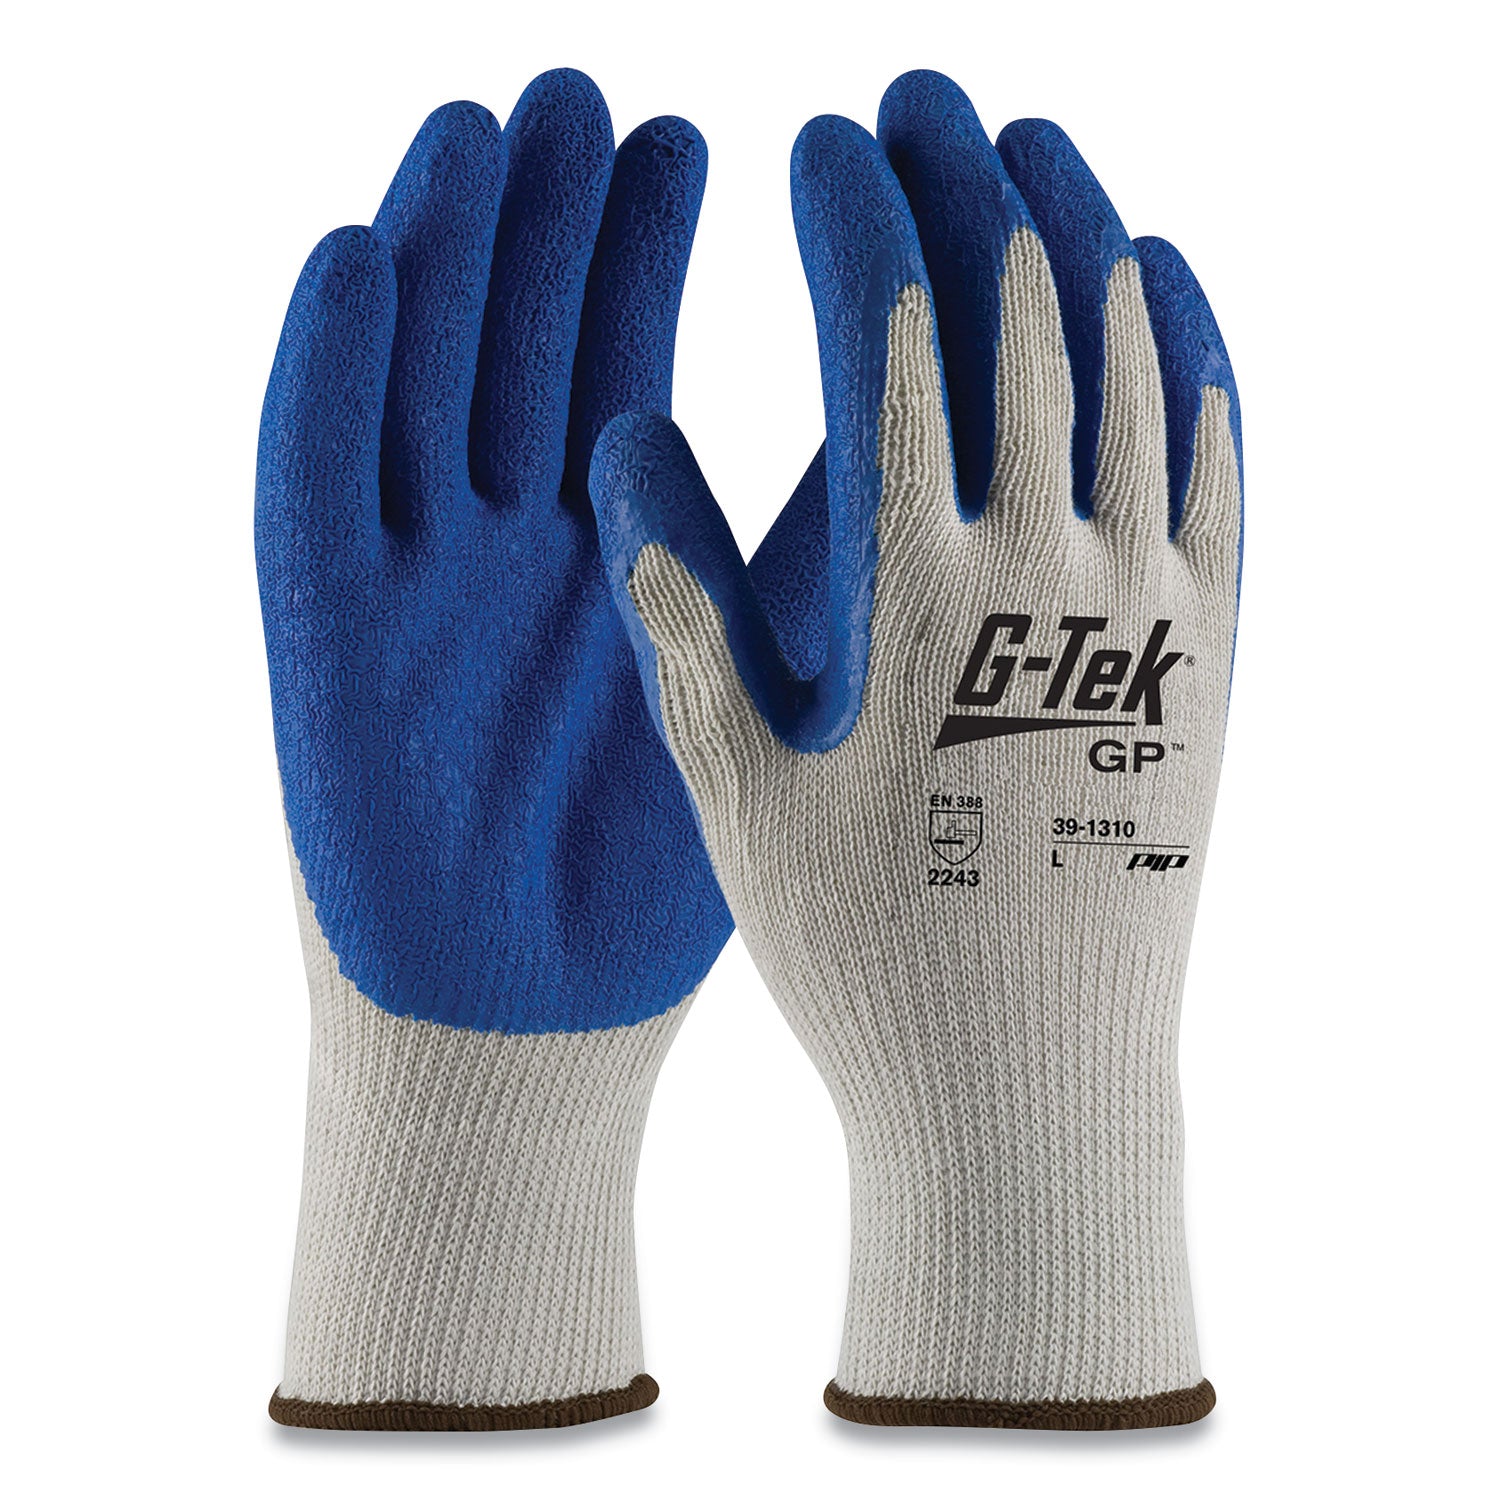 gp-latex-coated-cotton-polyester-gloves-x-large-gray-blue-12-pairs_pid391310xl - 1